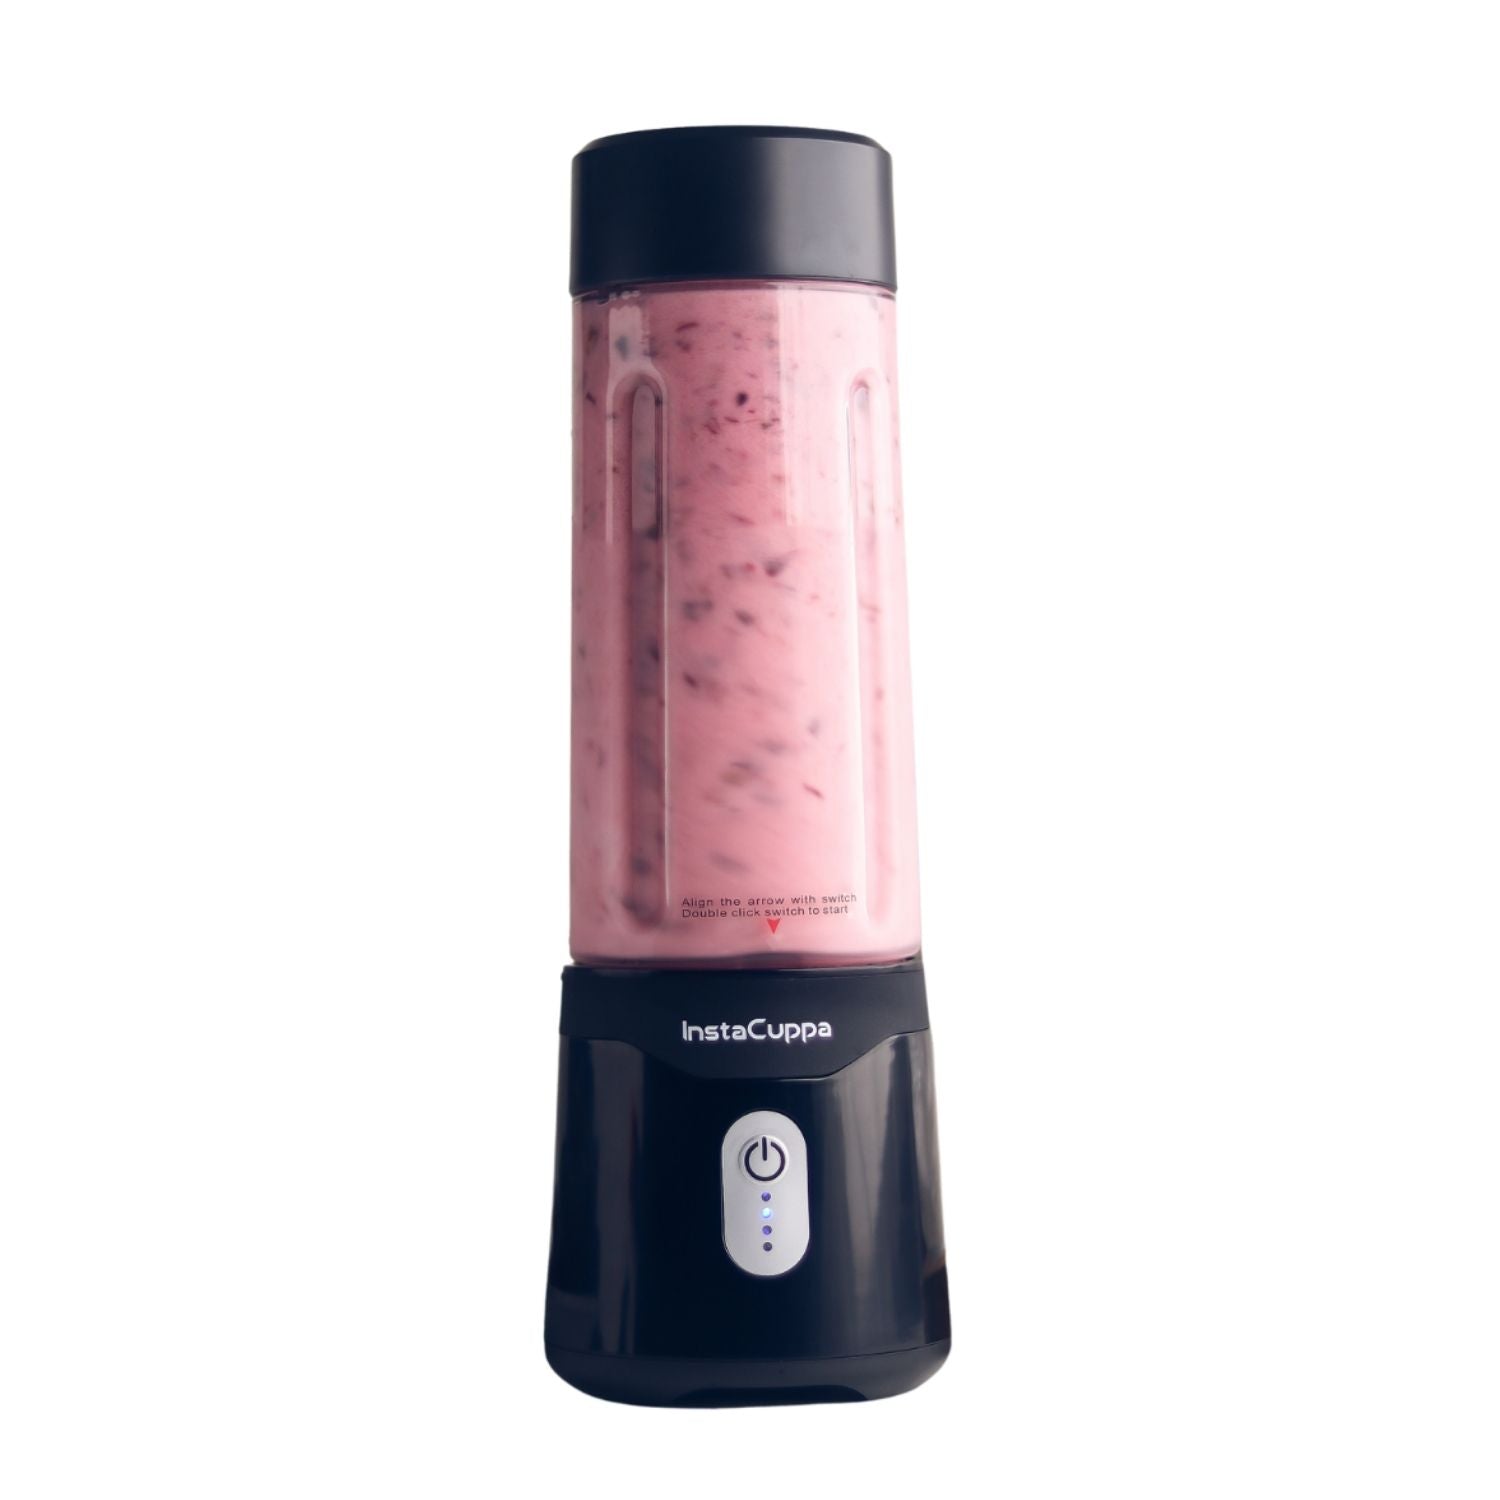 InstaCuppa Electric Shaker: Your Key to the Perfectly Blended